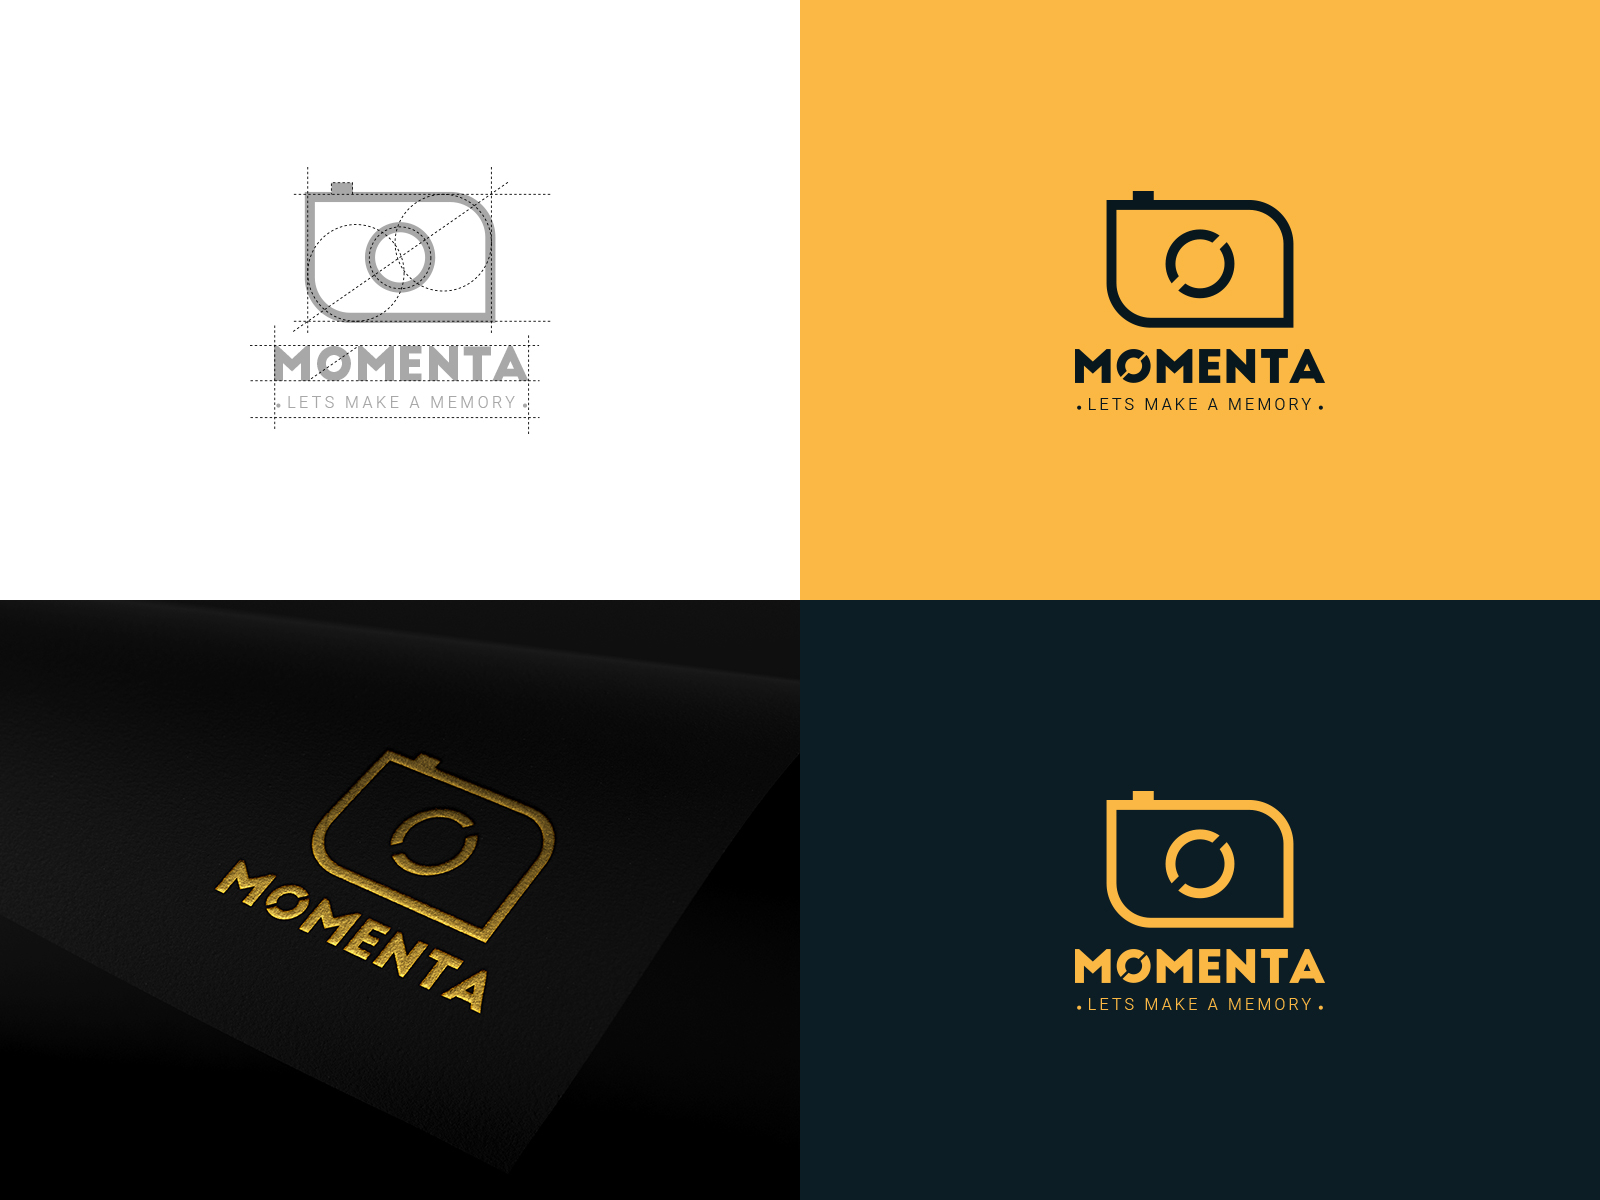 Photography studio logo and name by Pop Daniel M on Dribbble